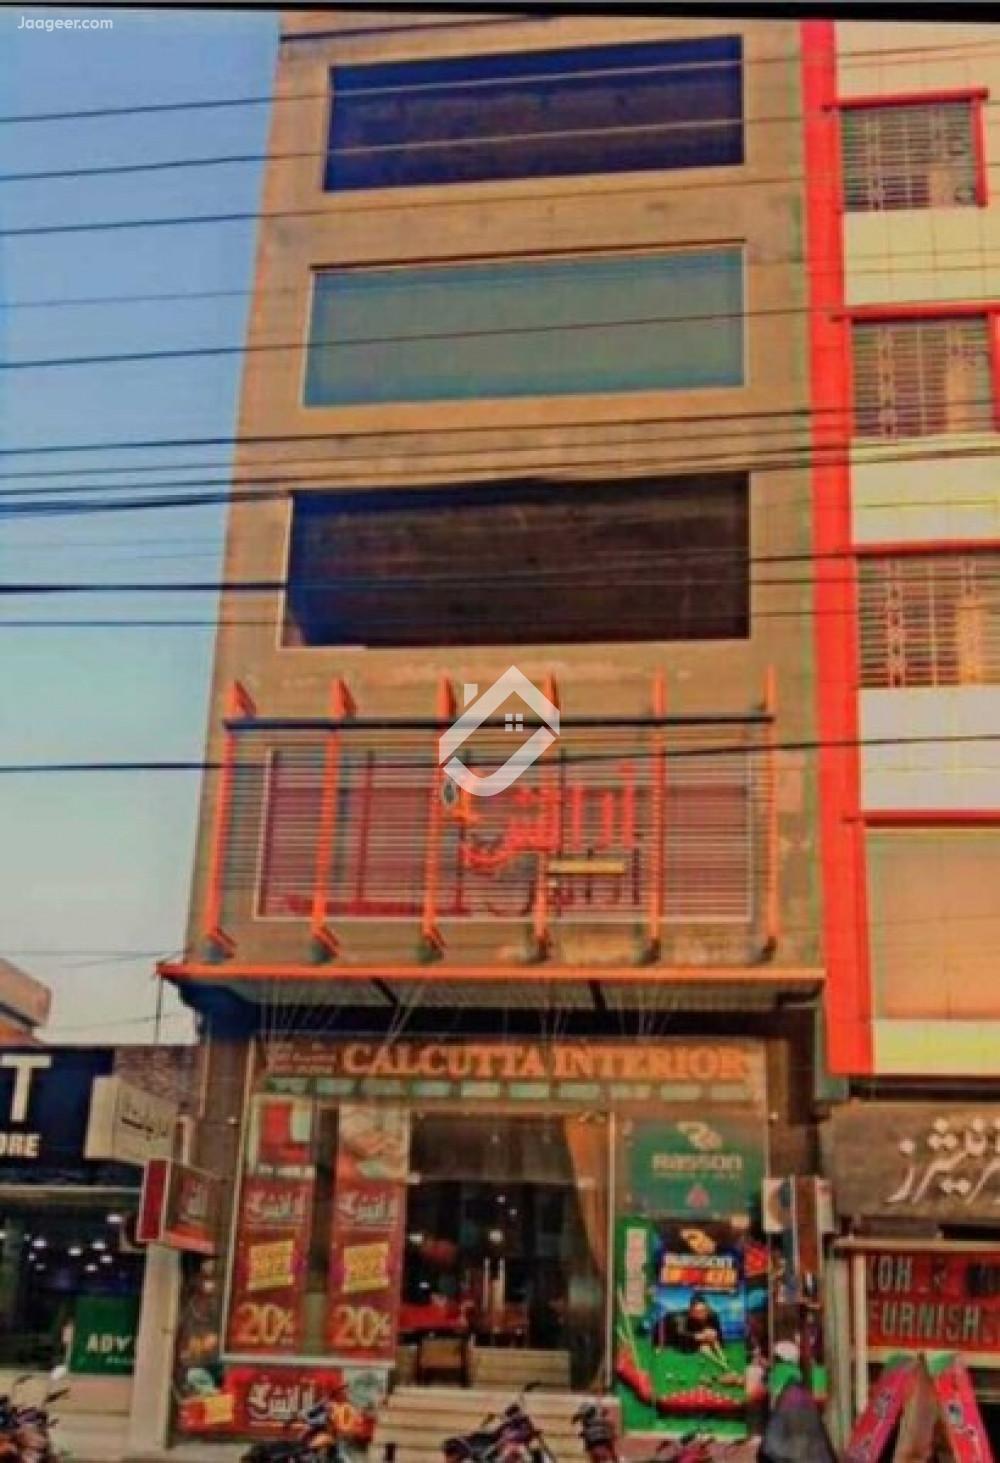 1200 Sqft 6 Stories Commercial Building For Sale In Old Satellite Town in Old Satellite Town, Sargodha